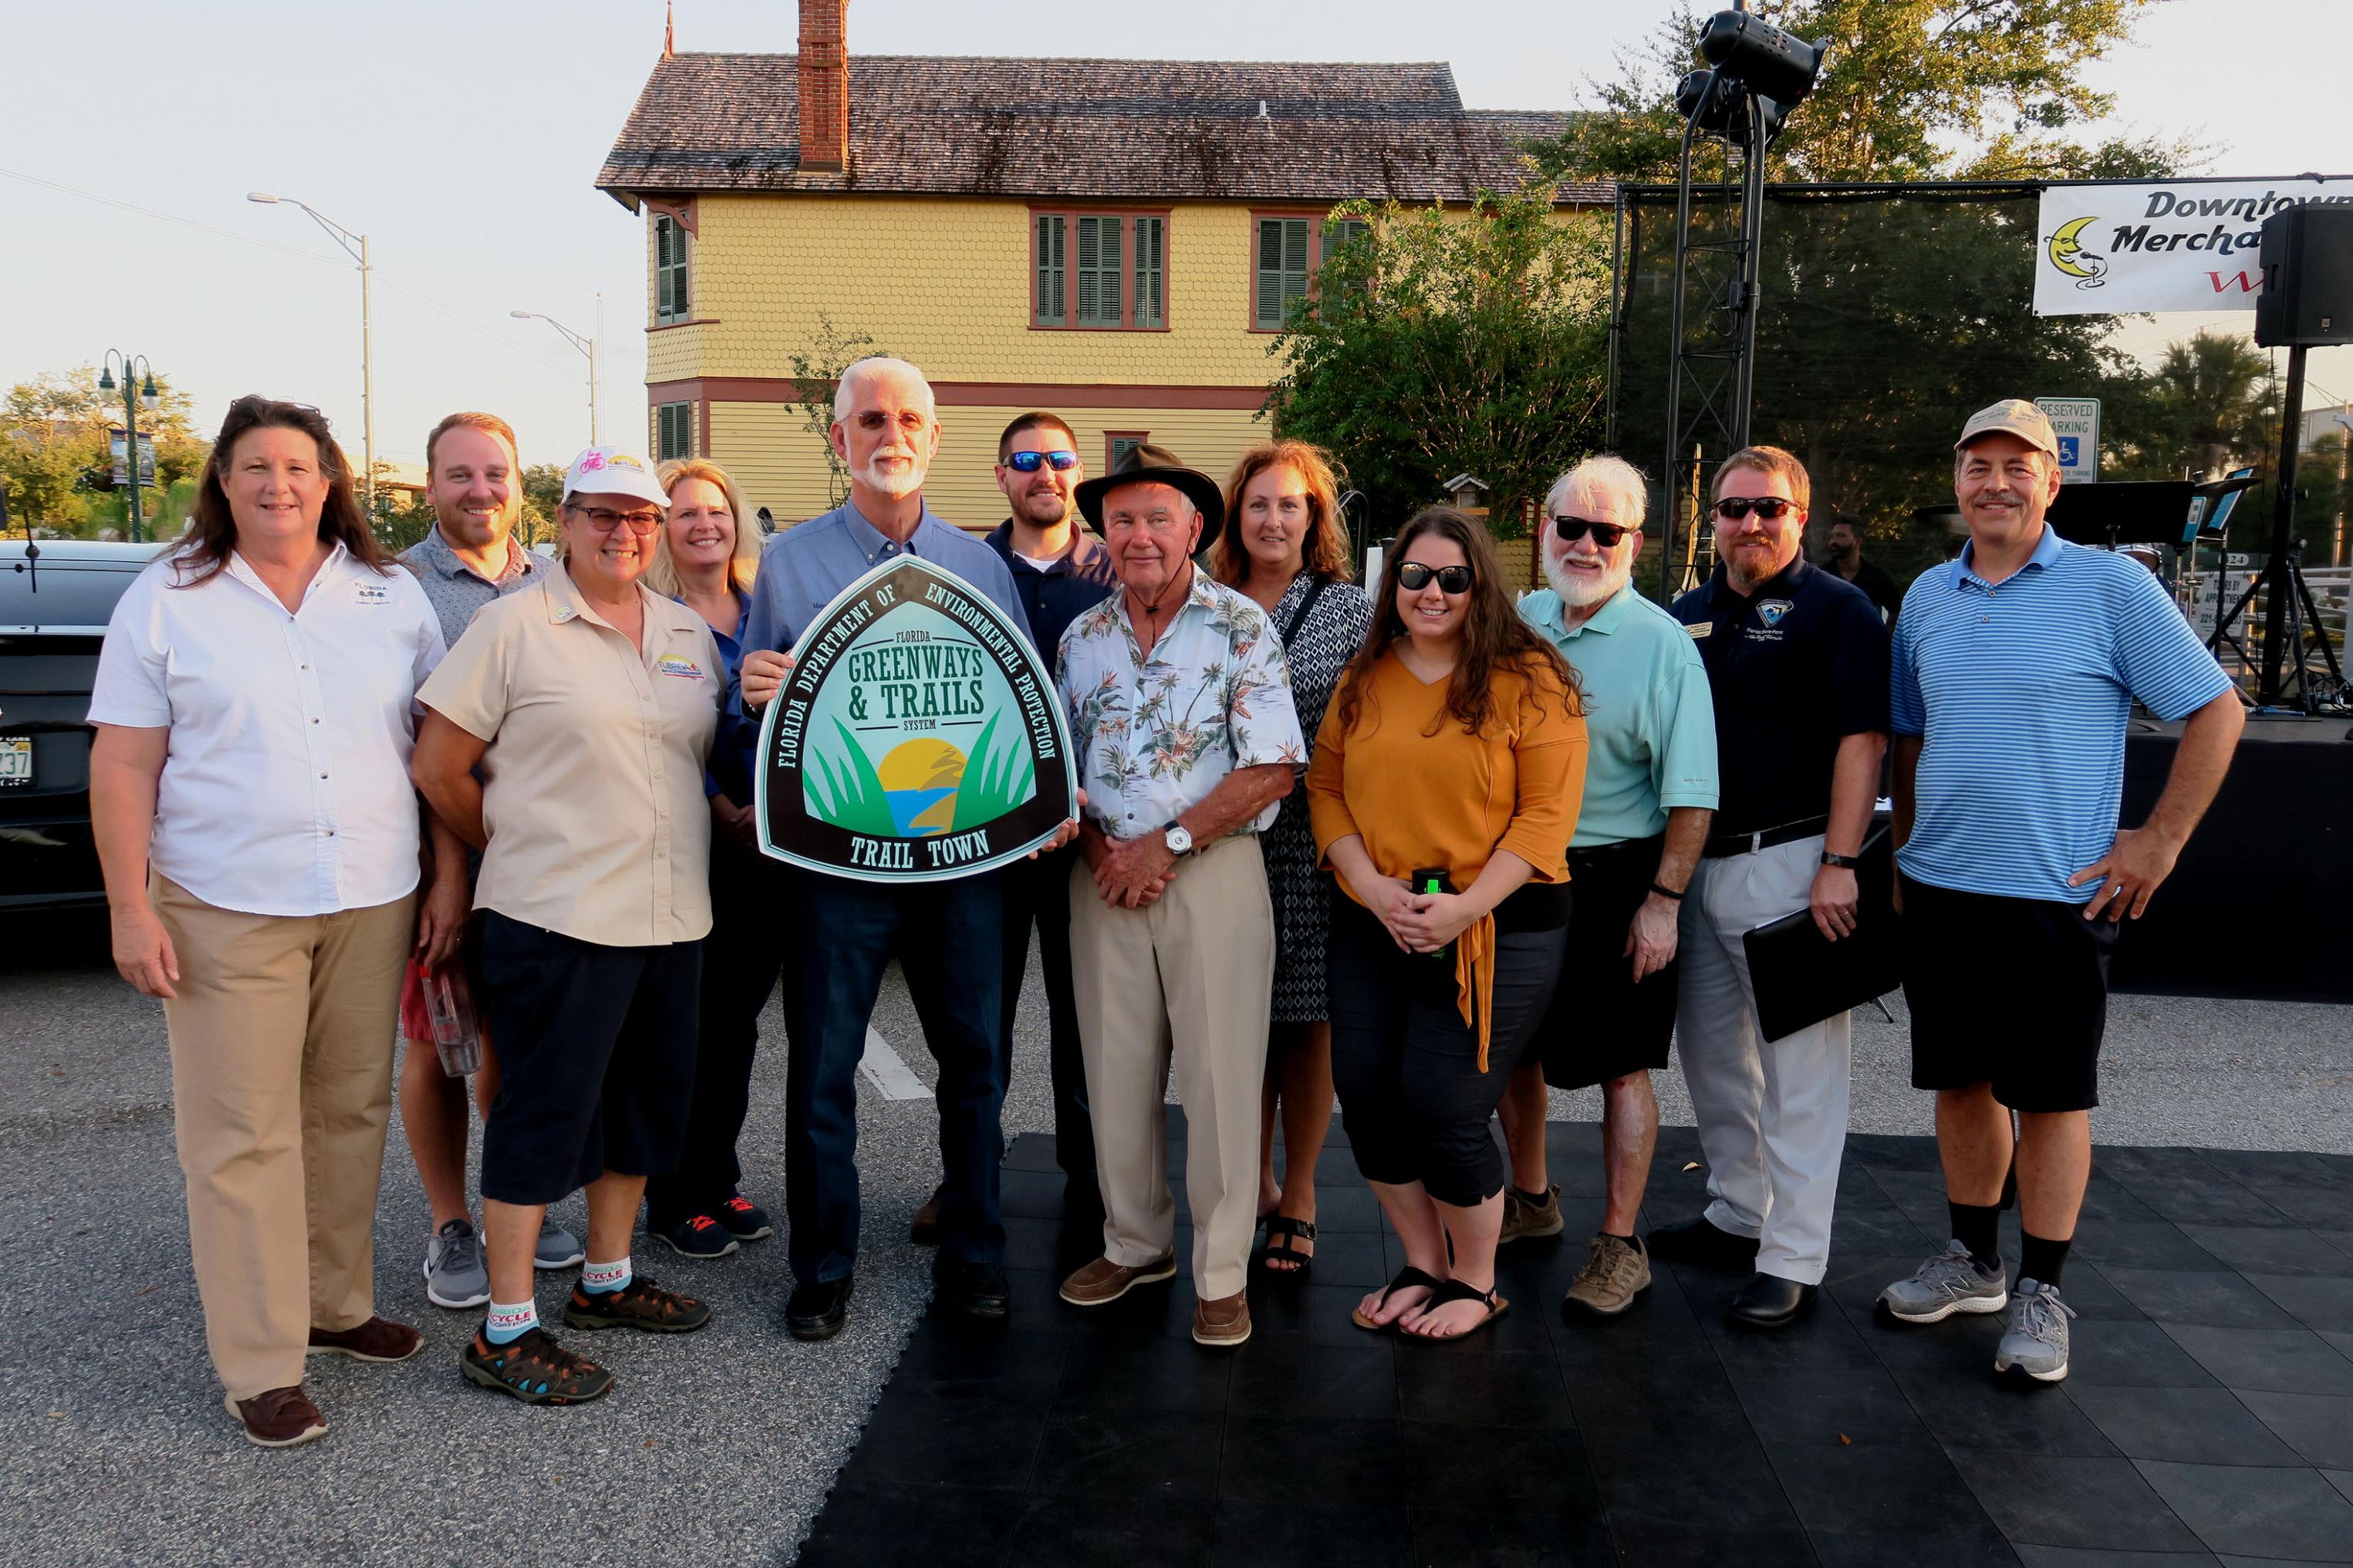 Titusville Mayor Walt Johnson (holding sign) with city staff, OGT staff, and Greenways and Trails Council members at Titusville event, OGT